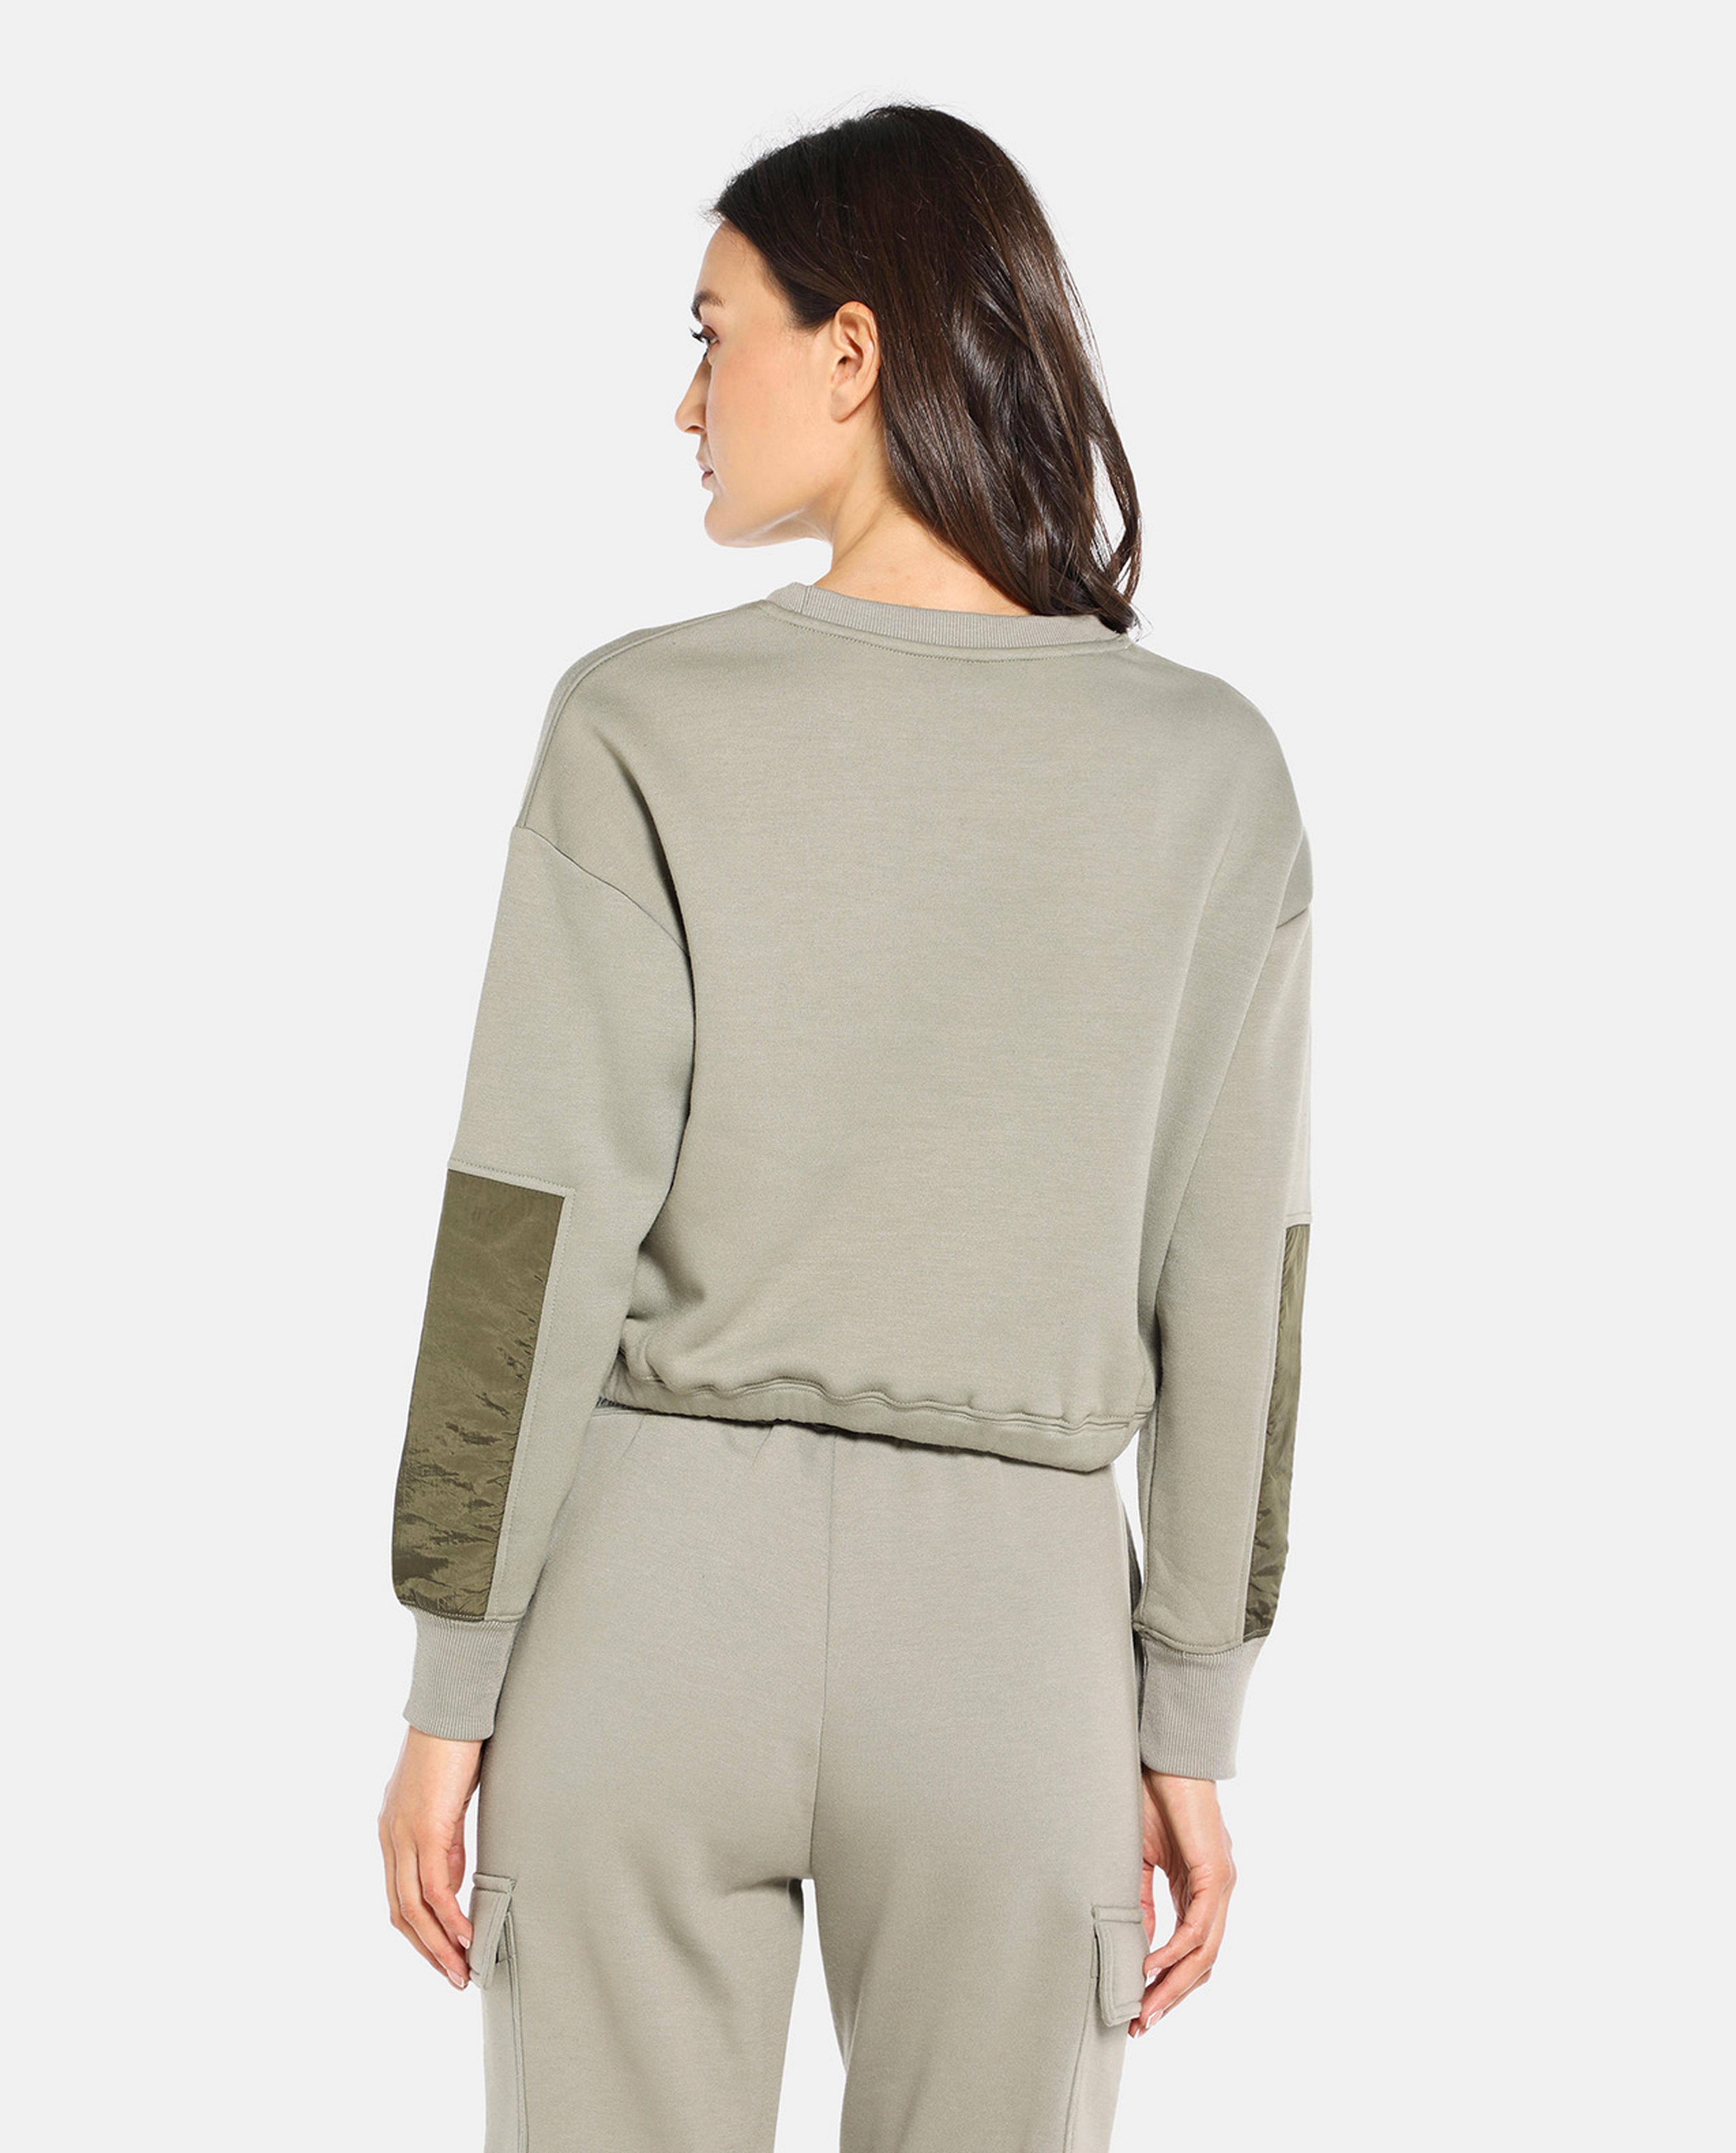 Green Polyester Sweater Top